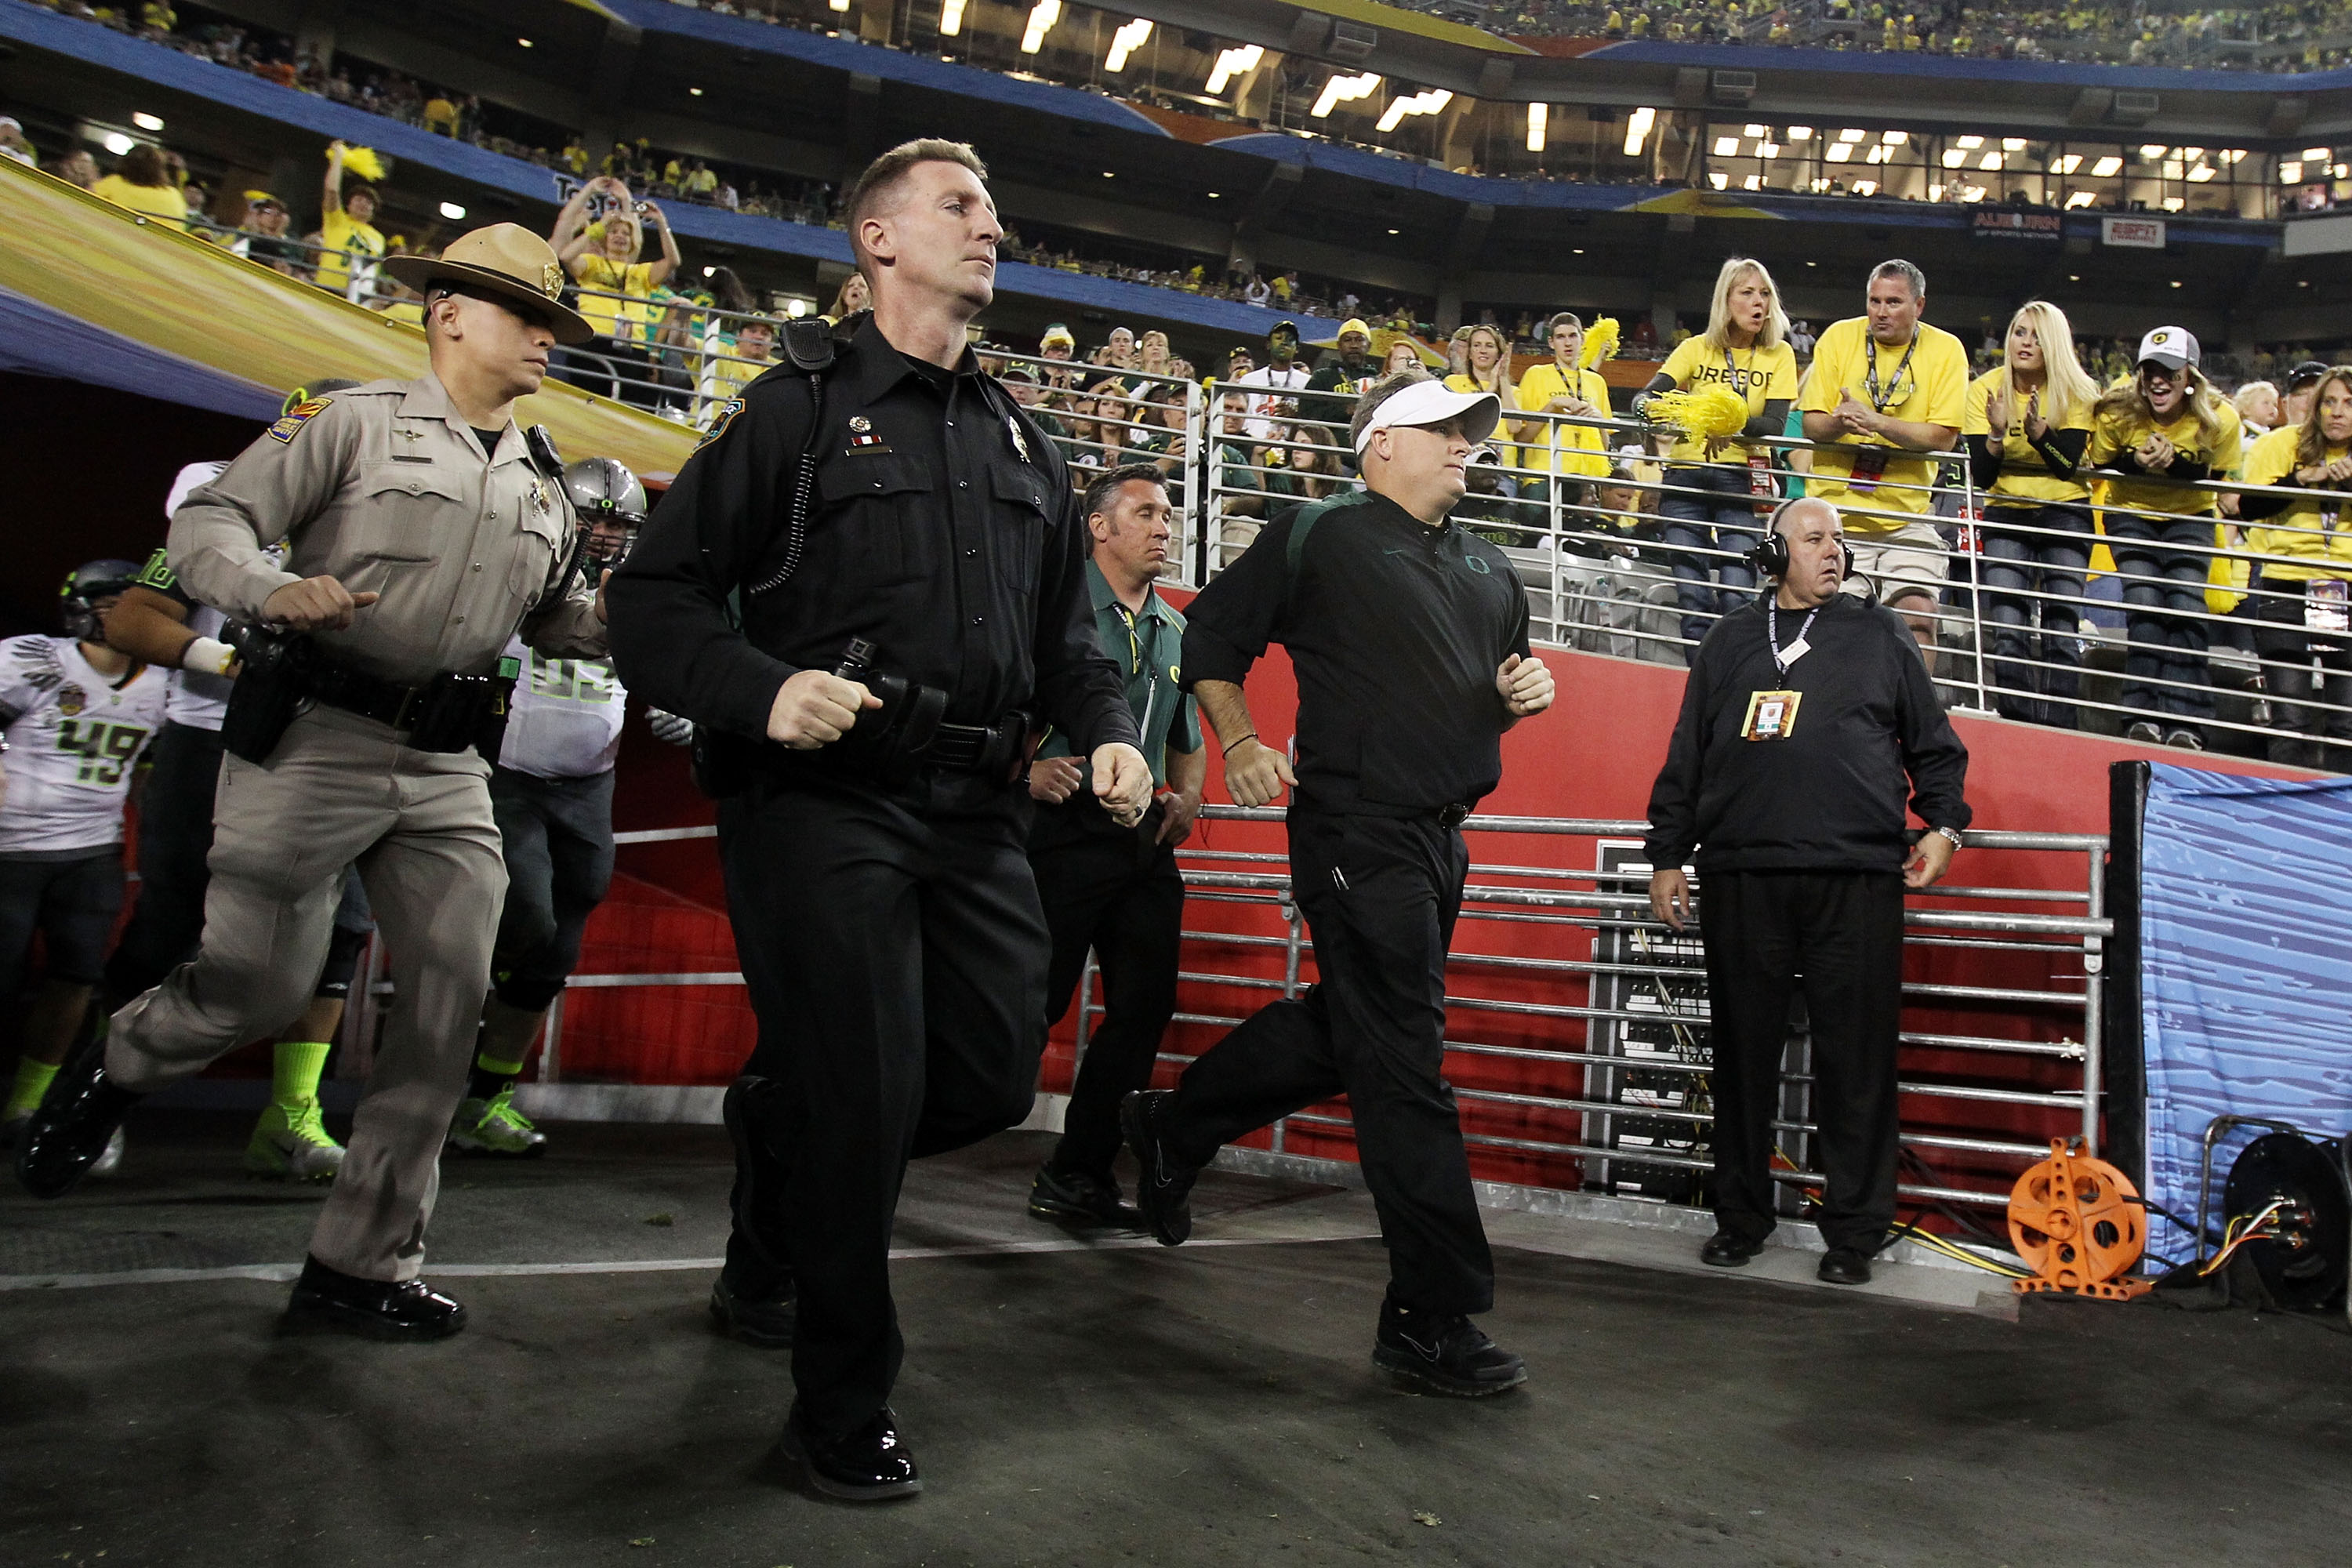 GLENDALE, AZ - JANUARY 10:  Head coach Chip Kelly of the Oregon Ducks takes the field during their 22-19 loss to the Auburn Tigers during the Tostitos BCS National Championship Game at University of Phoenix Stadium on January 10, 2011 in Glendale, Arizona